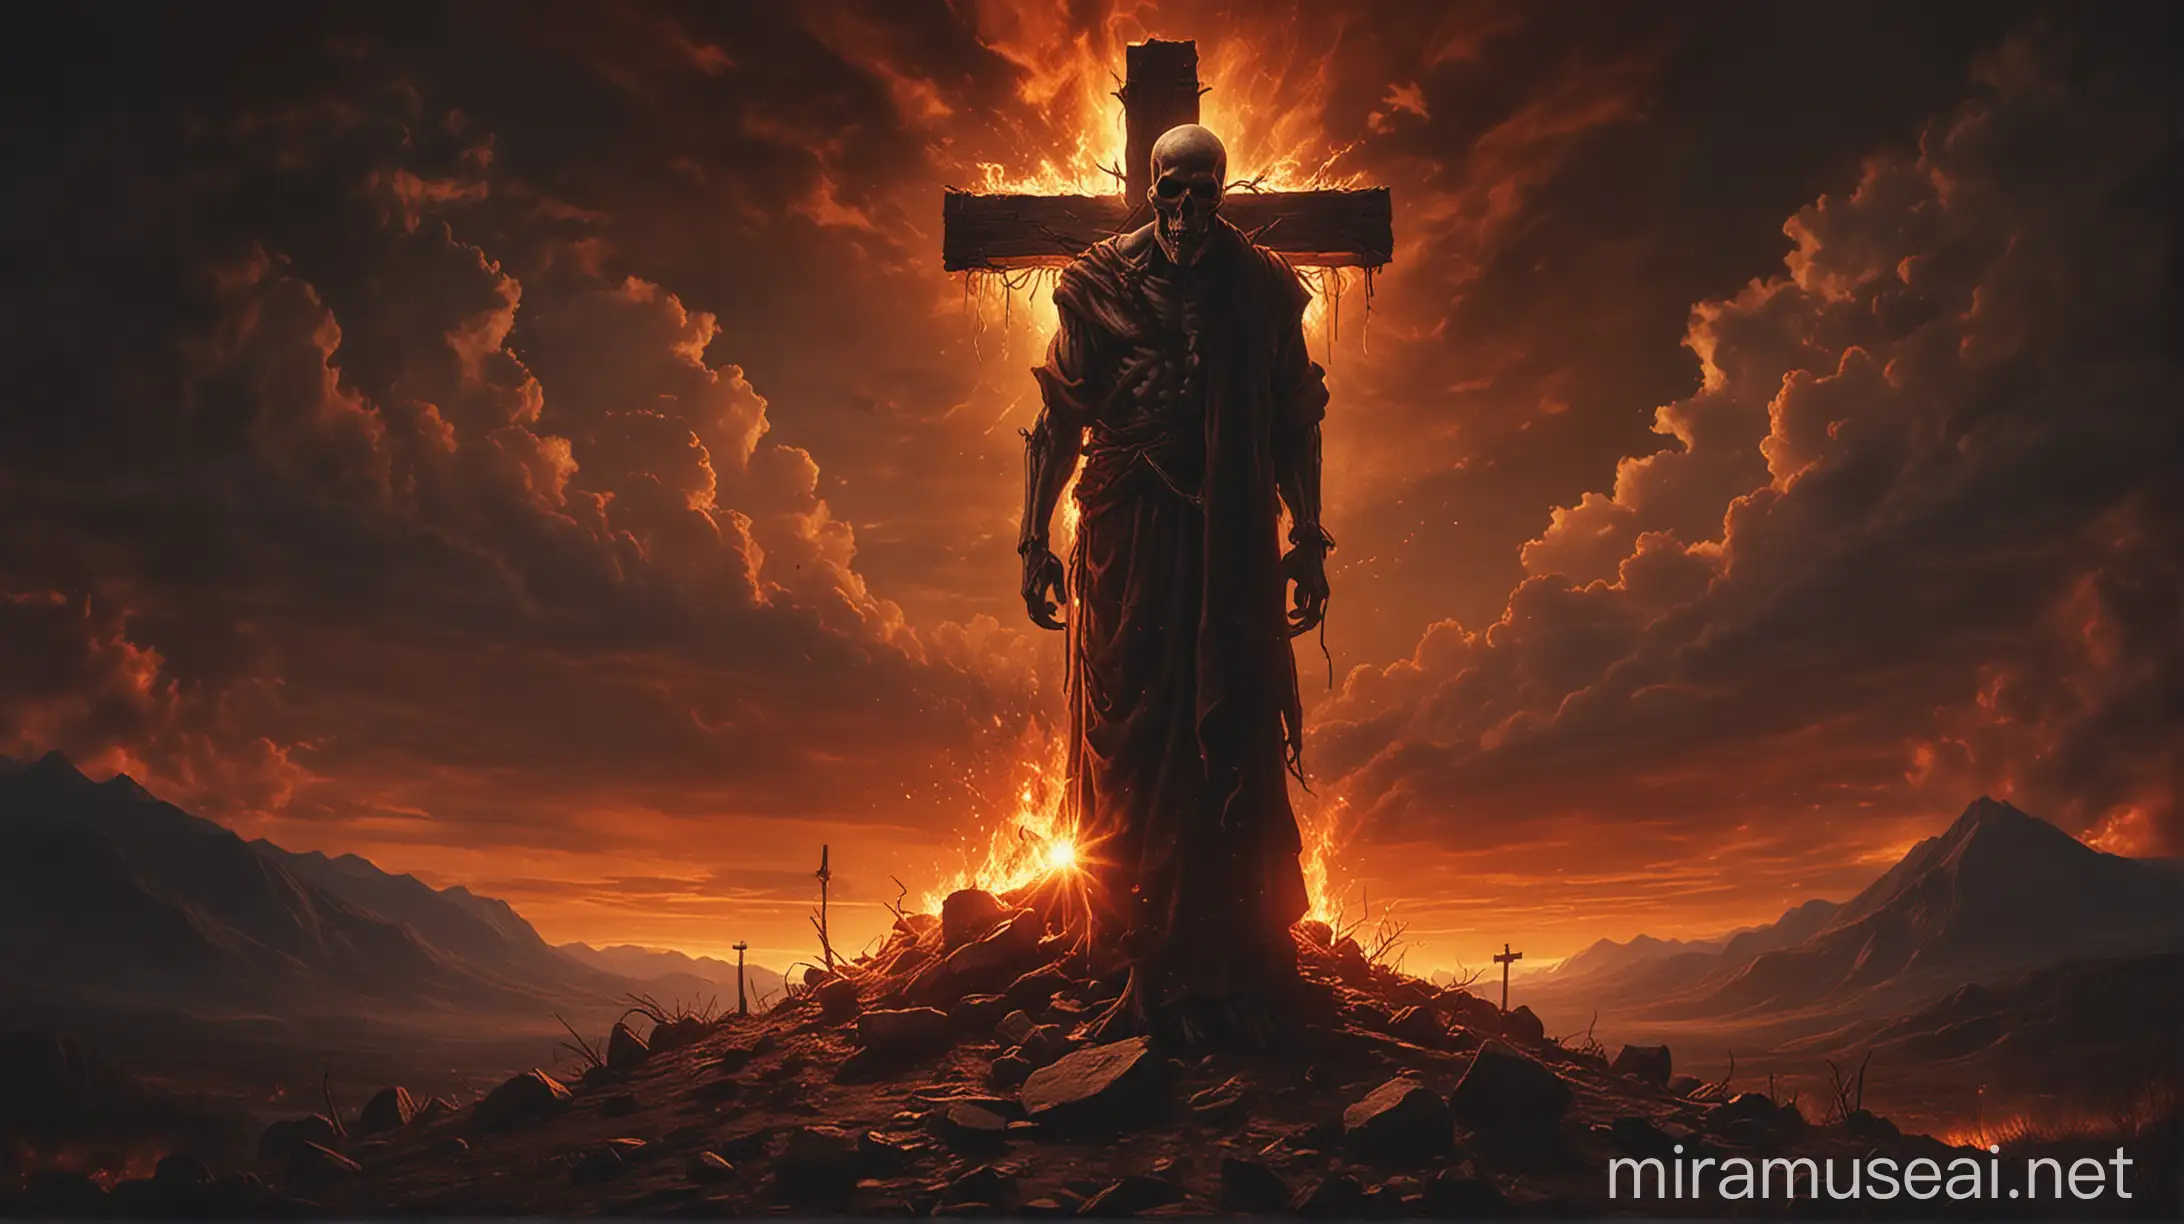 Solitary Figure on Mountaintop at Sunset Symbolism of False Prophets Darkness and Hope